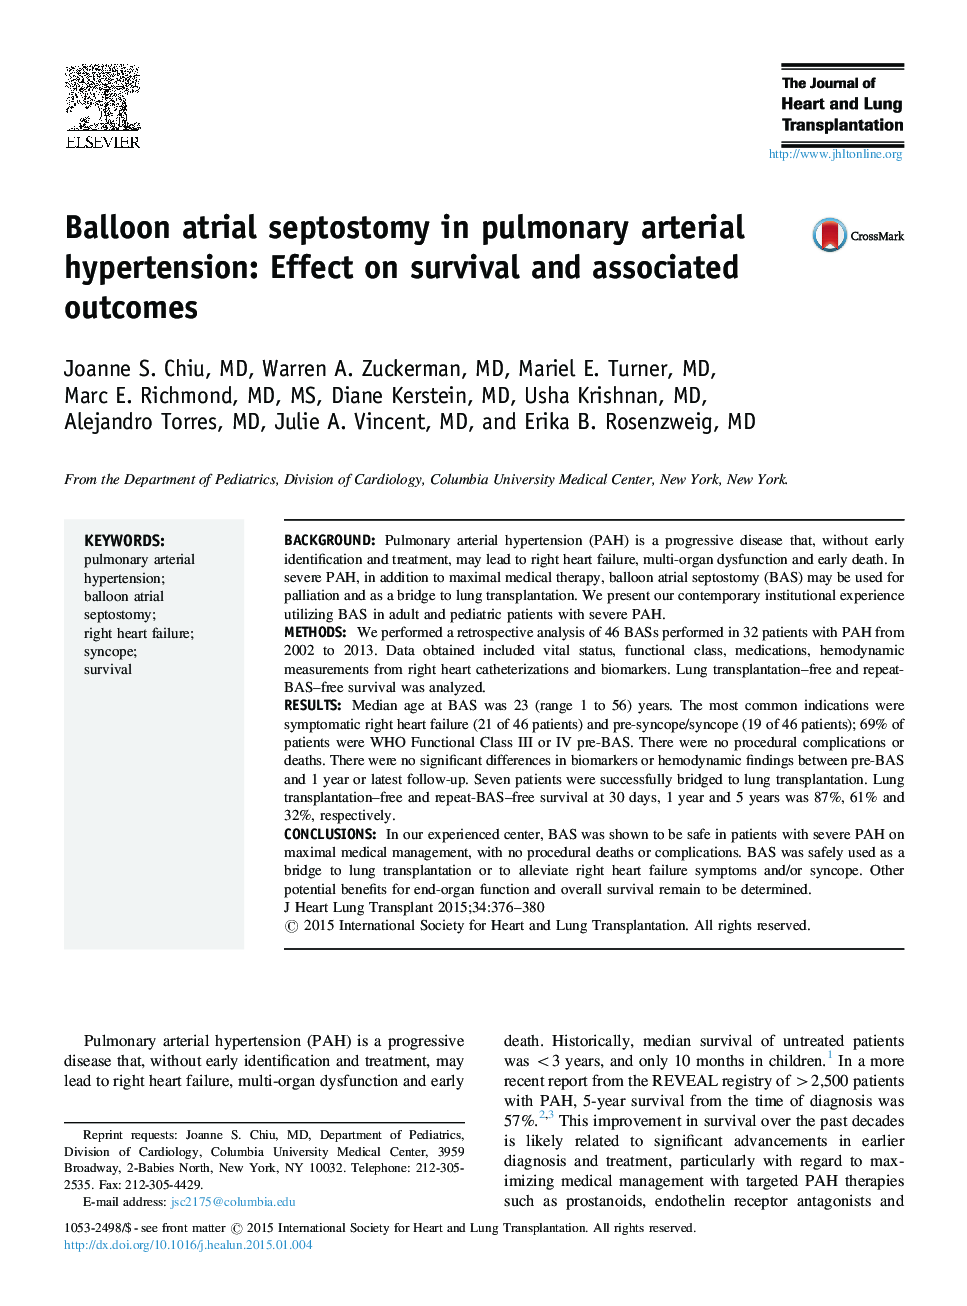 Balloon atrial septostomy in pulmonary arterial hypertension: Effect on survival and associated outcomes